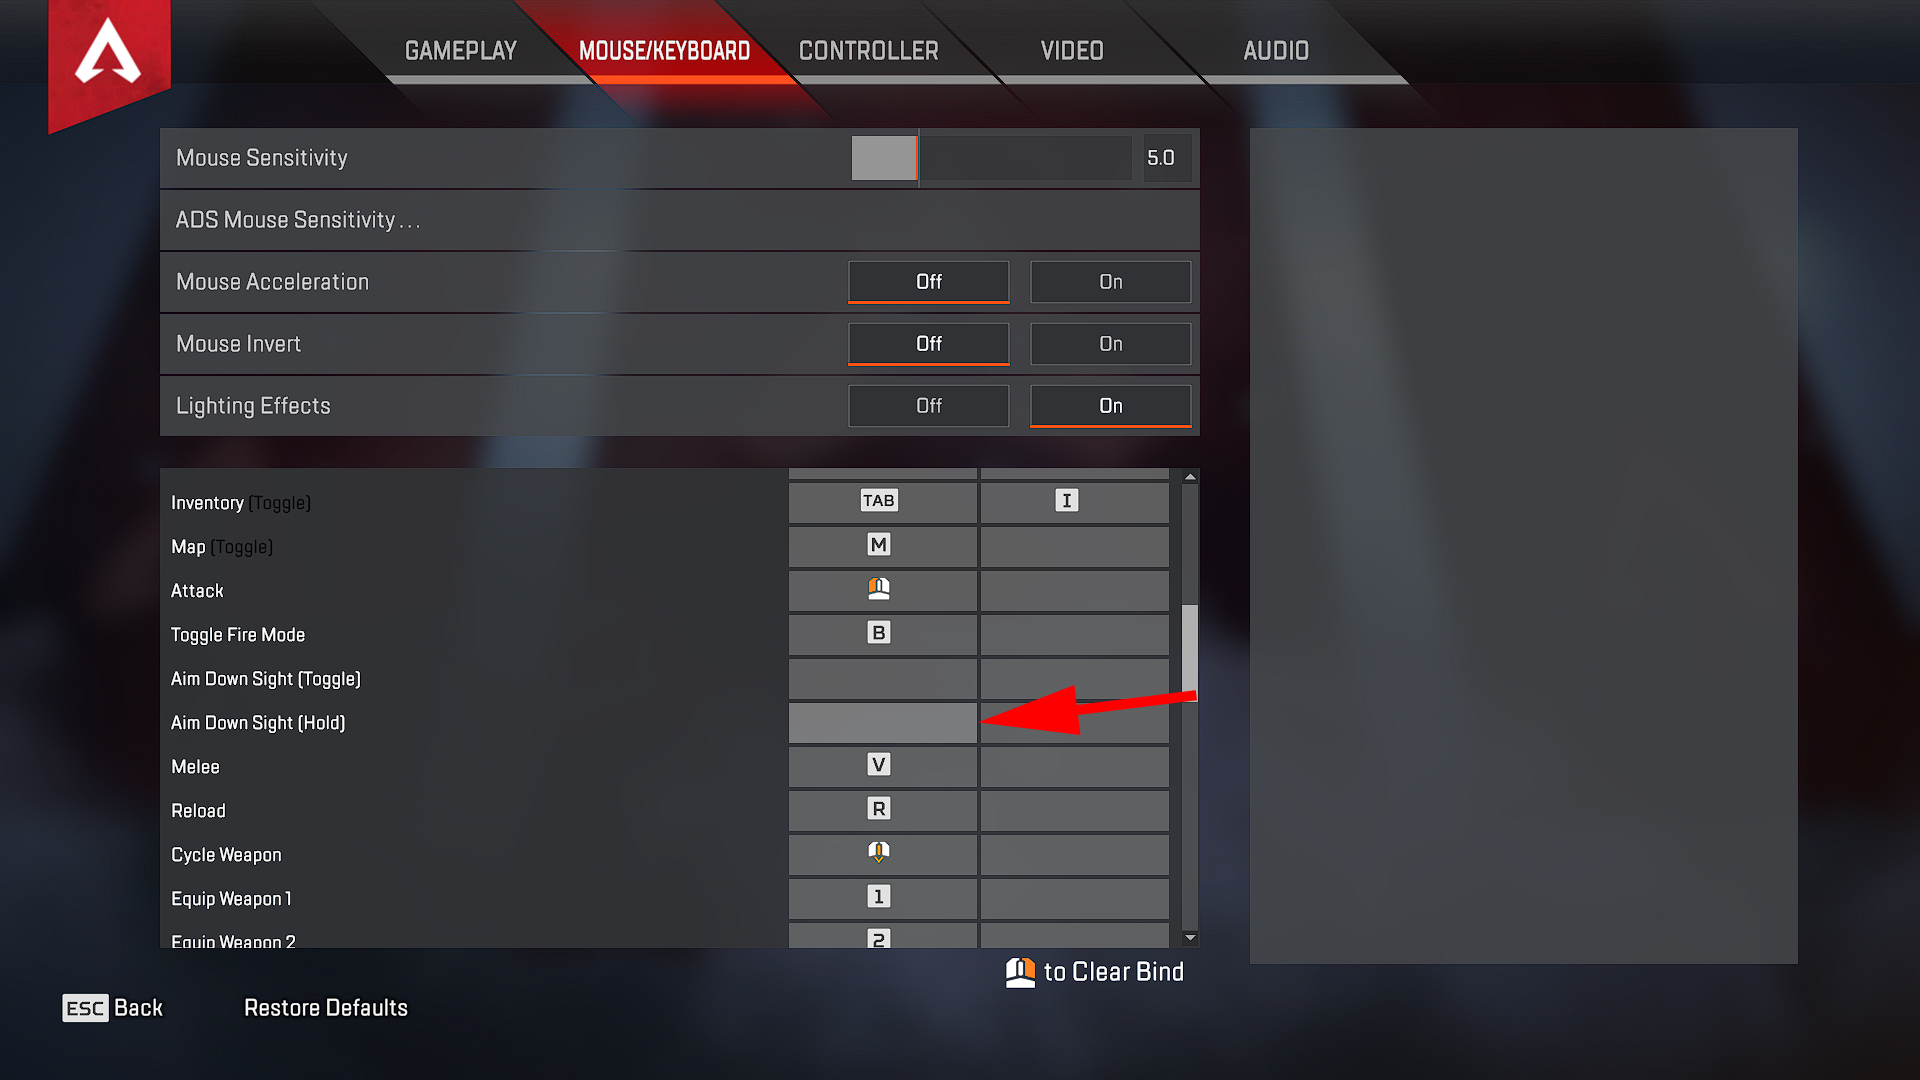 37 Sample How to get mouse and keyboard to work on ps4 apex legends for Youtuber